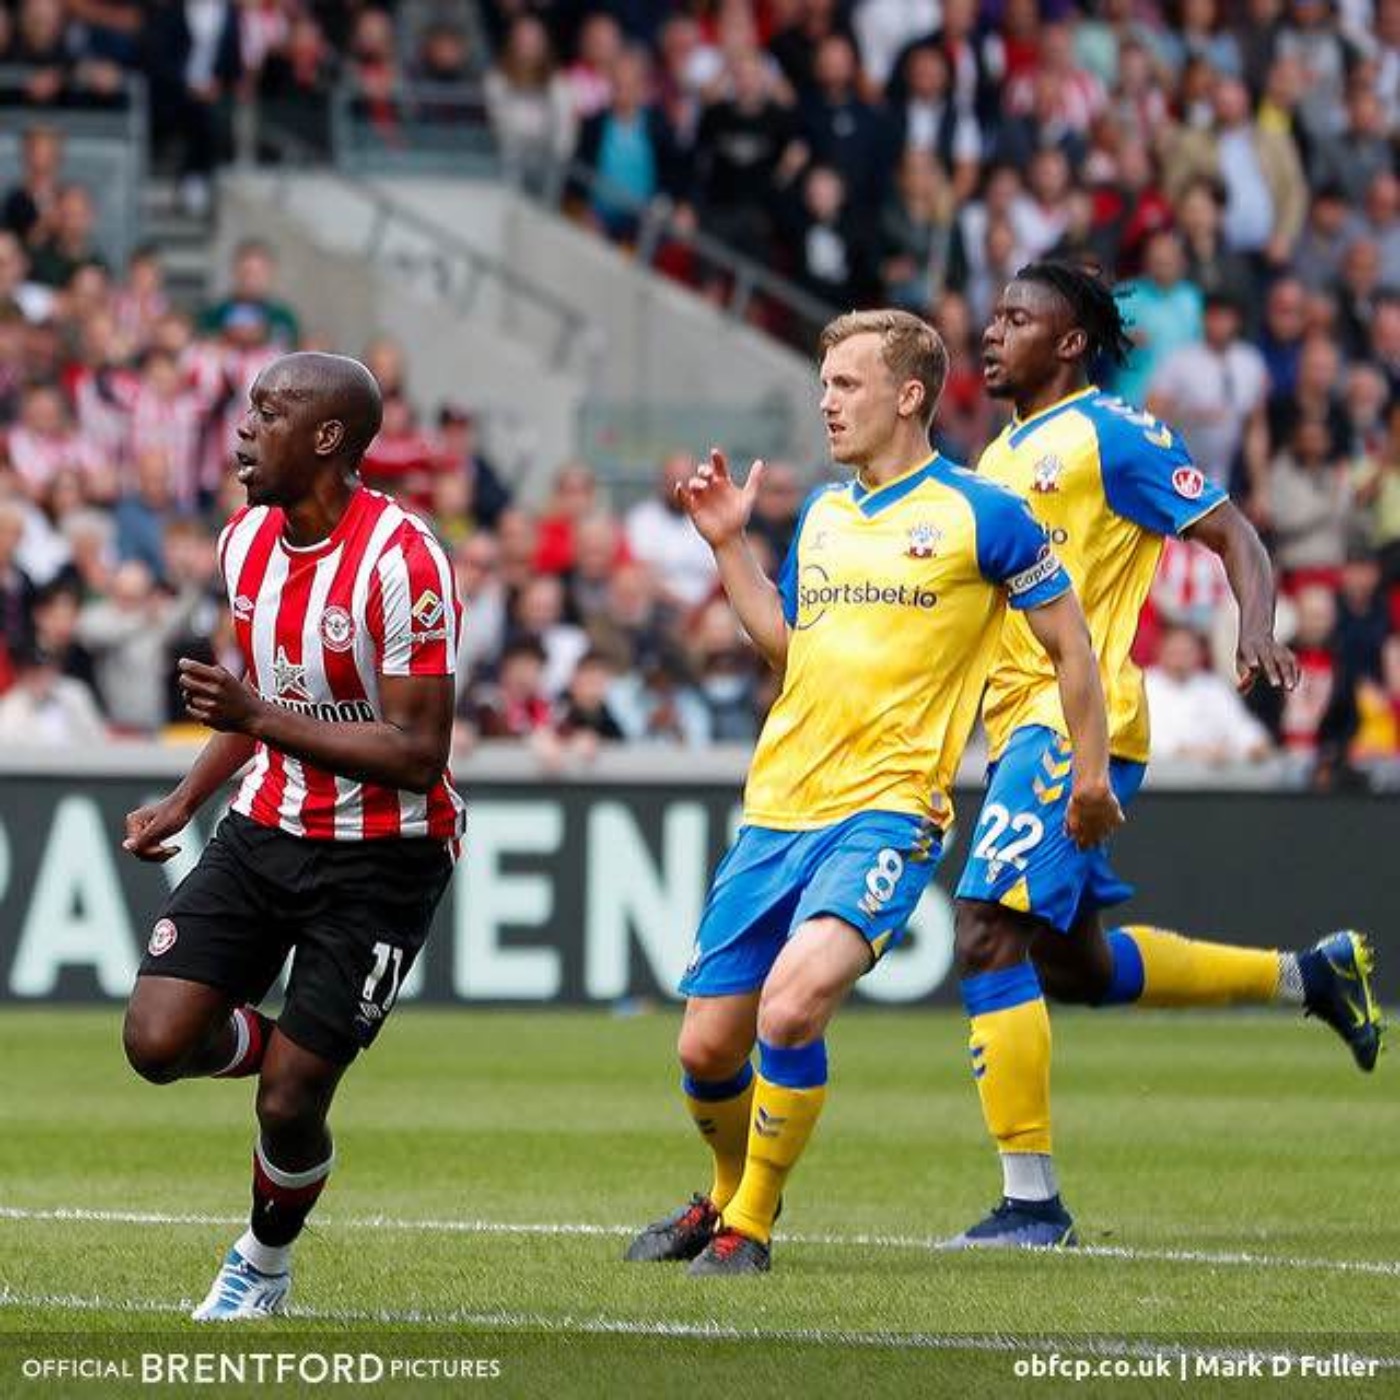 Saints Marching On to Try Railroad Bees' Unbeaten Run - Brentford v Southampton Preview Podcast